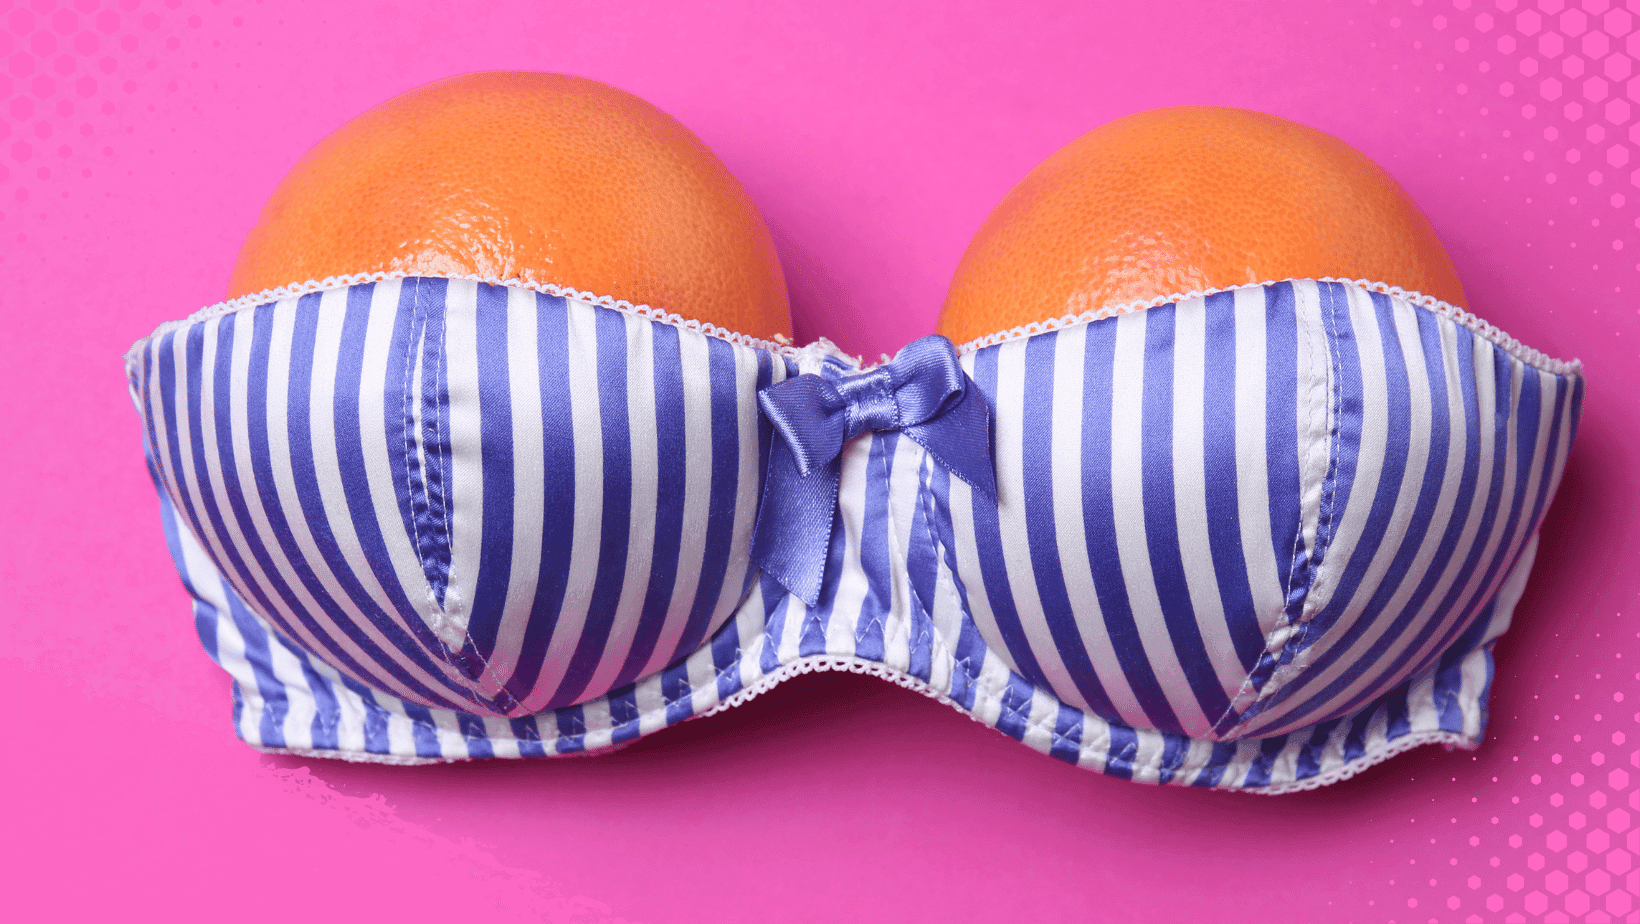 Jen⁷ 🏳️‍🌈 on X: Each boob has a different shape, and that shape helps to  determine the style of bra that is perfect for you and you alone. Here's  some:  /